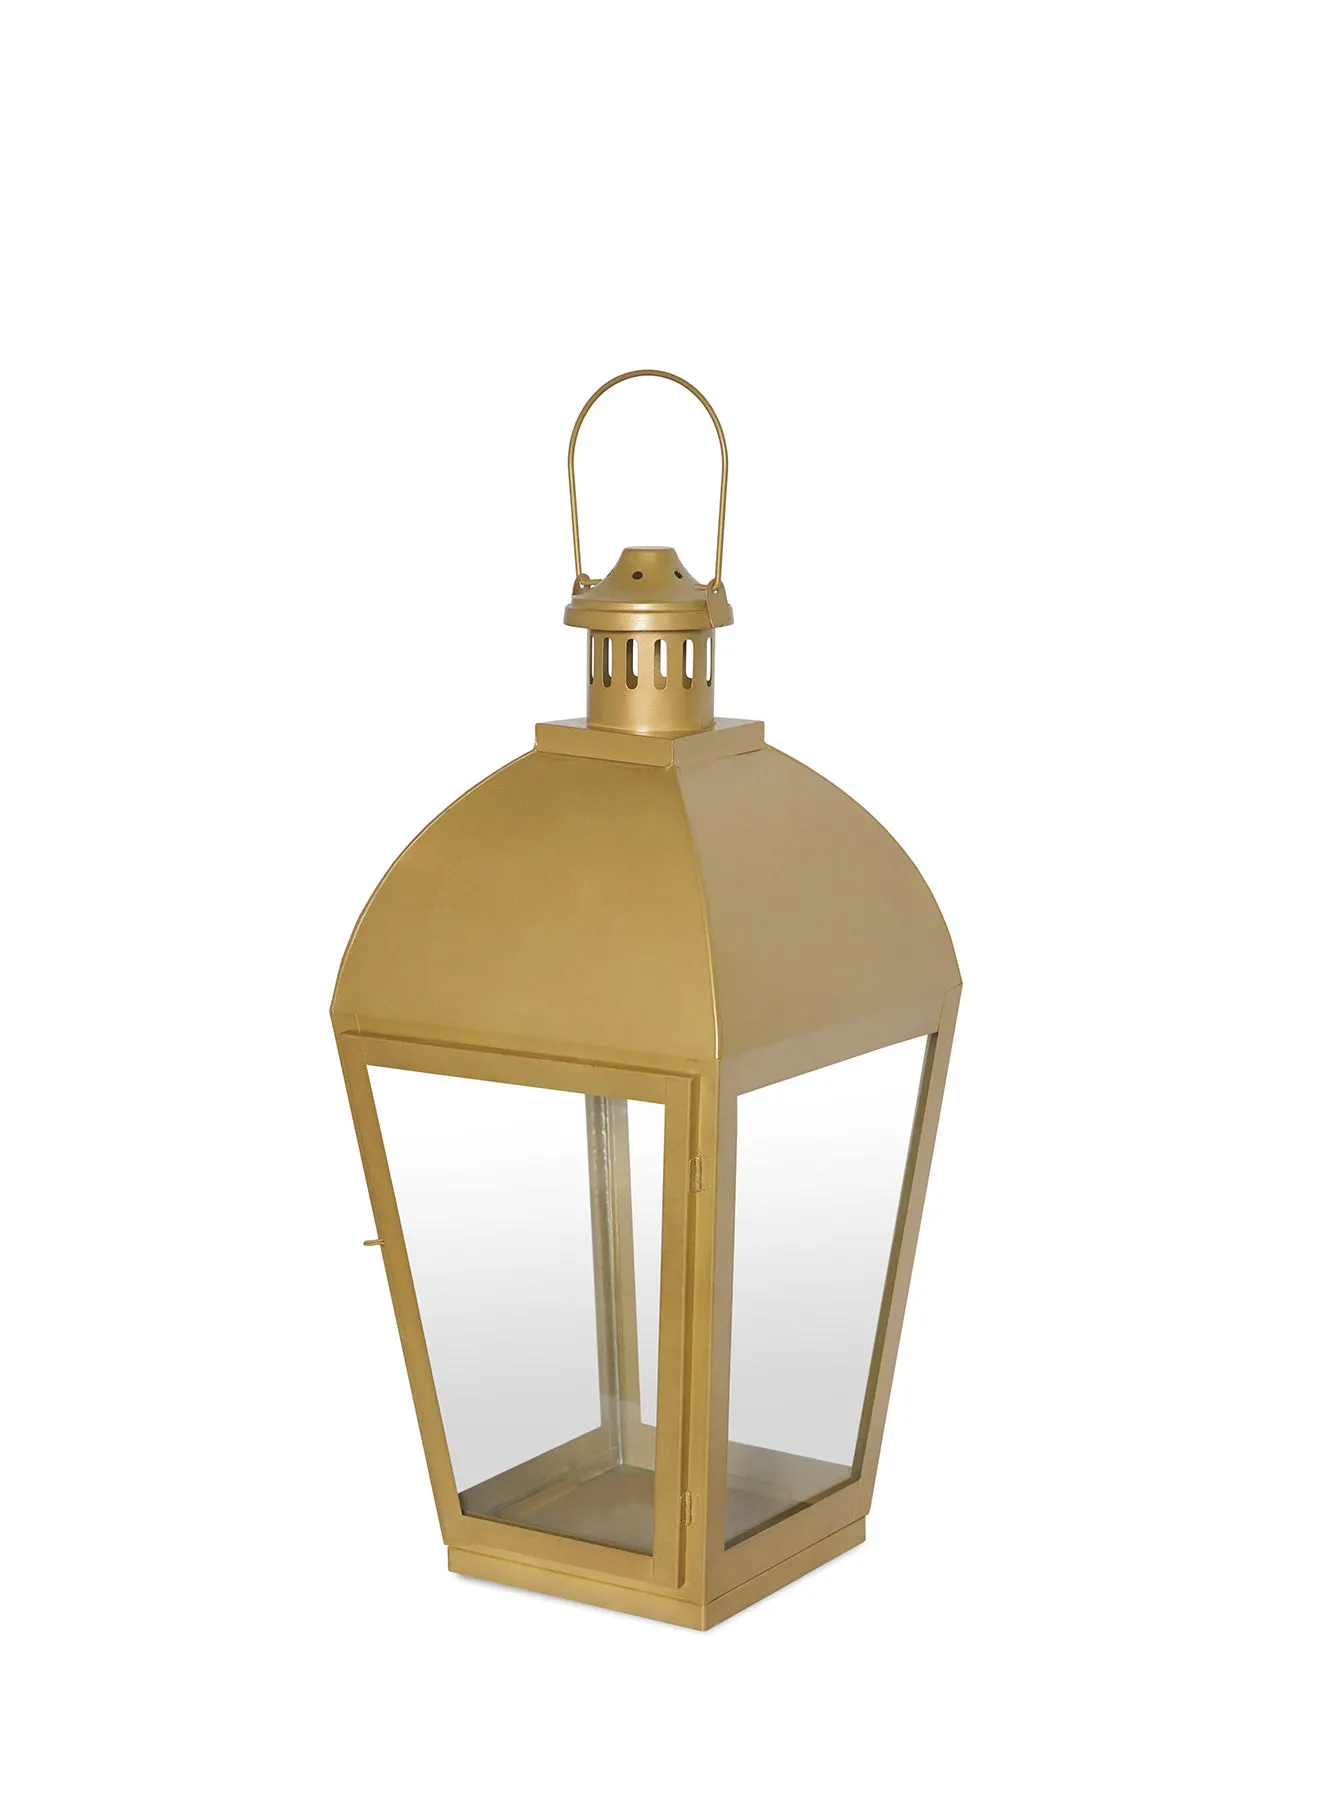 ebb & flow Modern Ideal Design Handmade Lantern Unique Luxury Quality Scents For The Perfect Stylish Home Gold 17.15X17.15X54centimeter